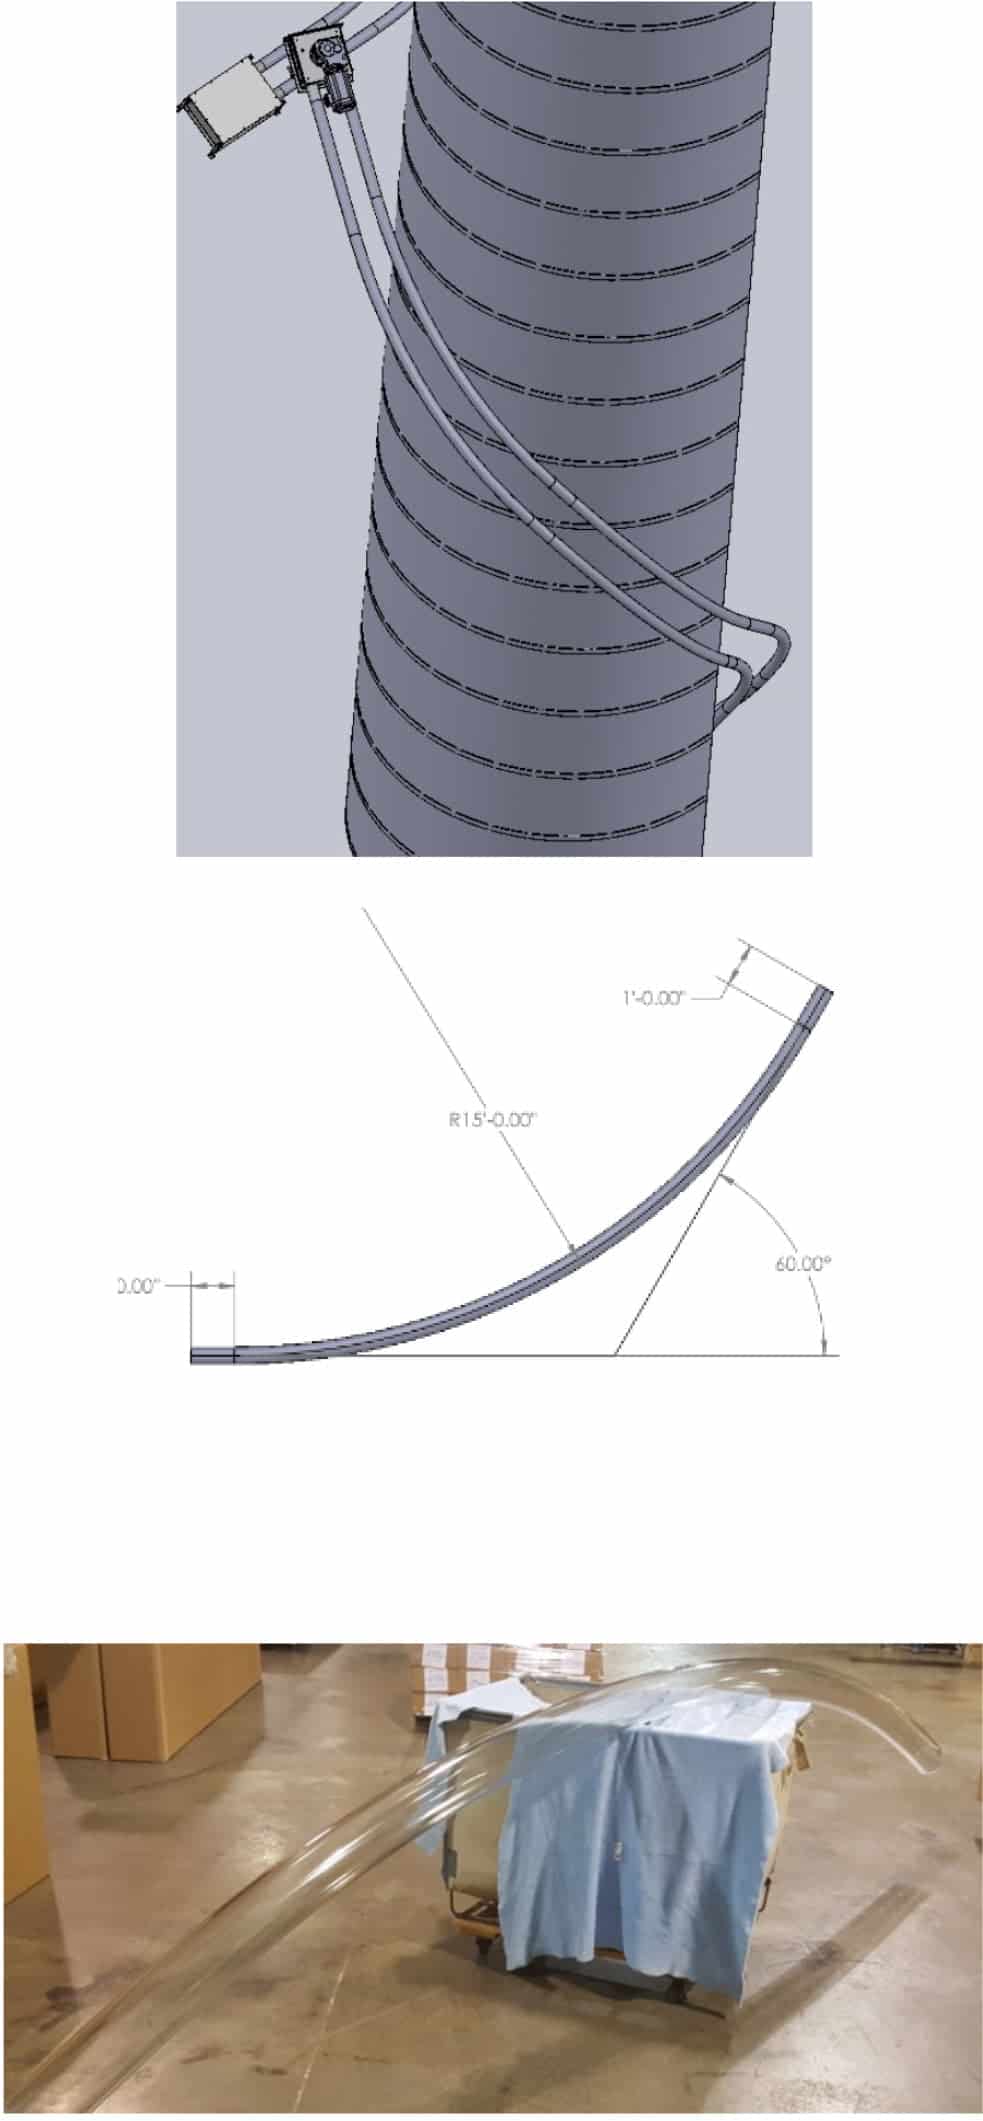 A collage of images. Top photo shows a model of the giant bend around a mock up of the silo. Middle photo shows a design schematic of the silo helix bend. Bottom photo shows the fabricated tubing bend made of provista (PETG).